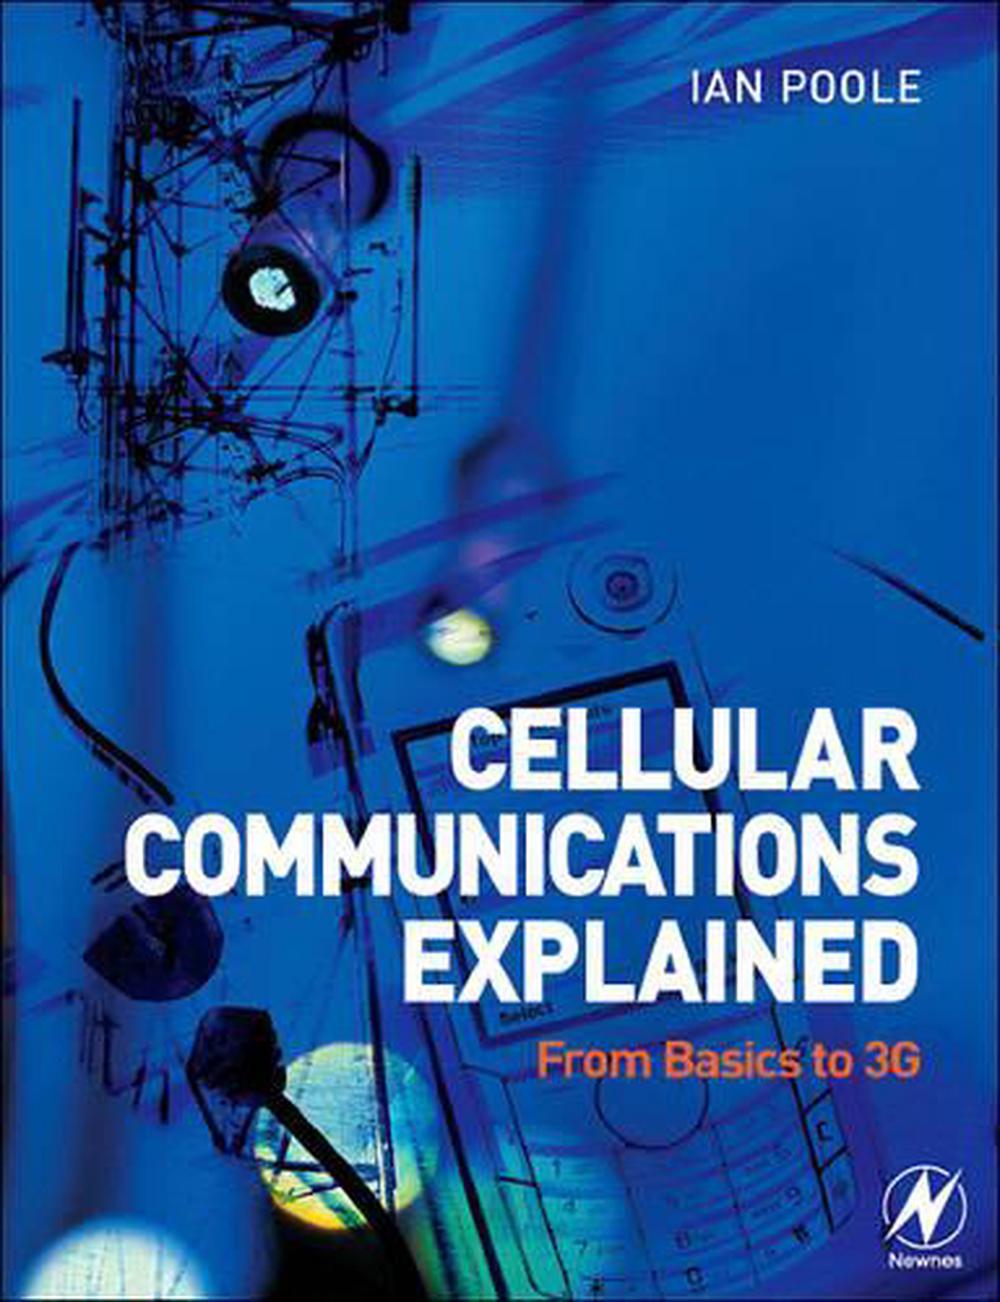 Cellular Communications Explained From Basics to 3G by Ian Poole